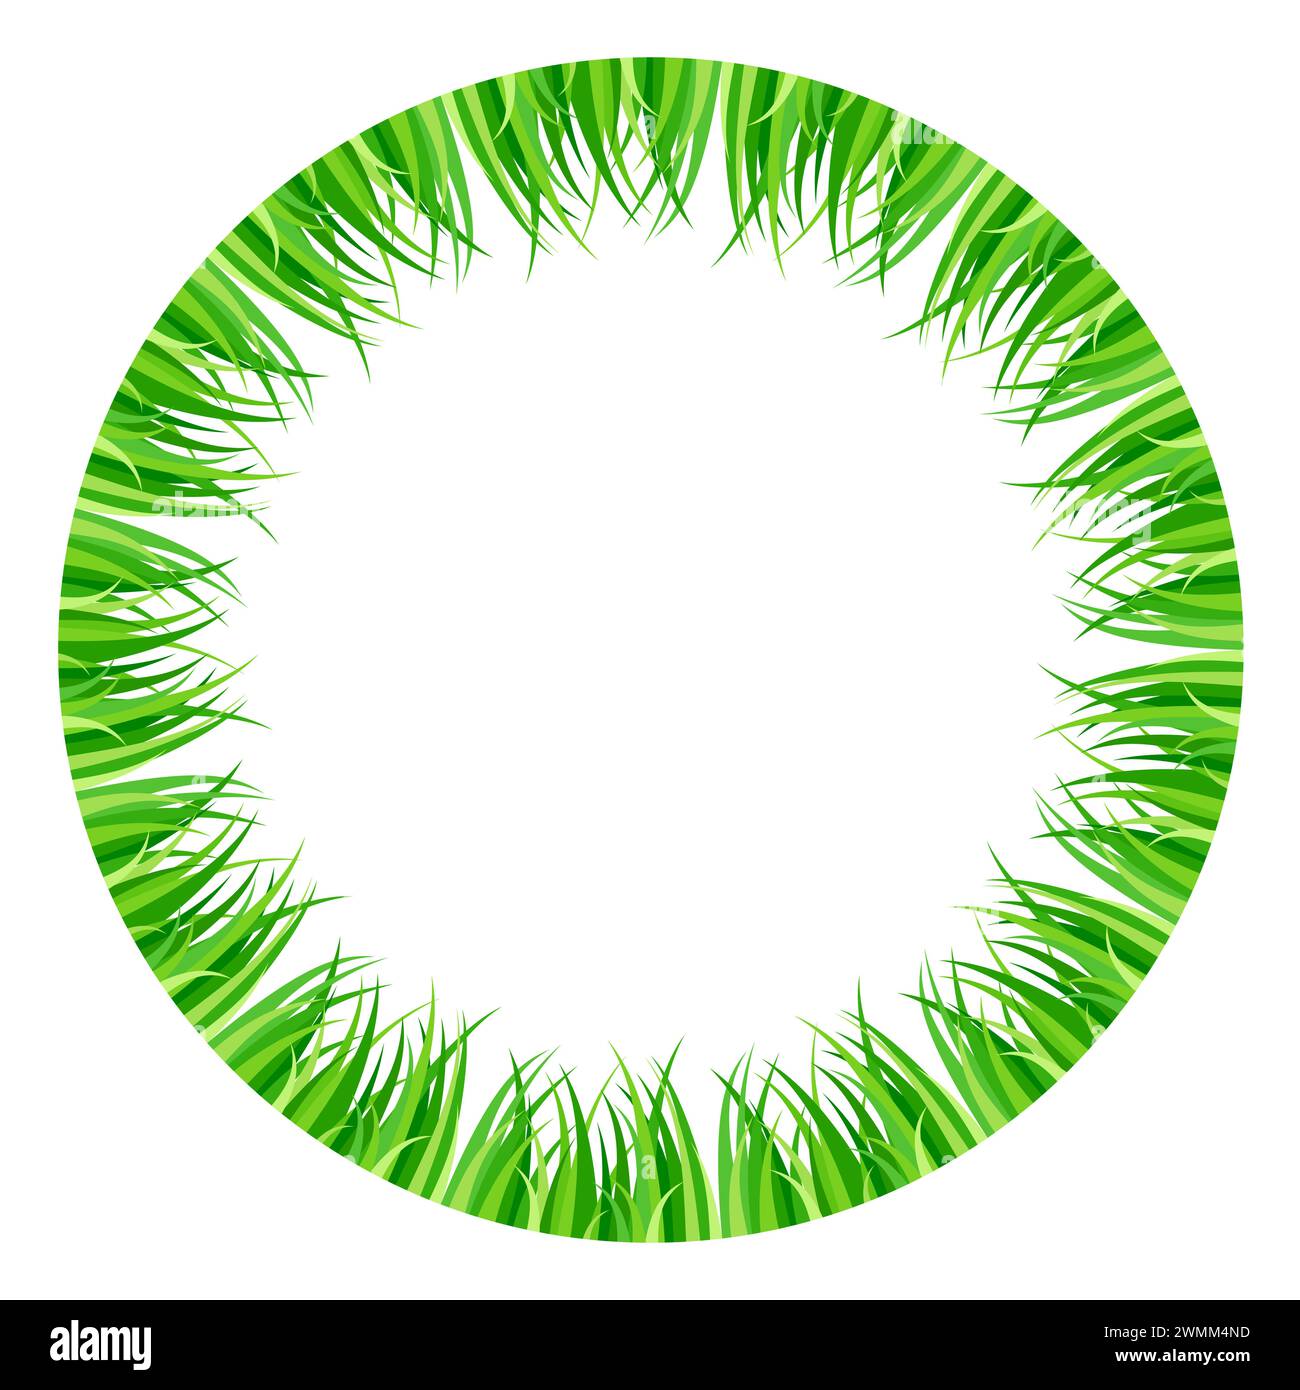 Green grass arranged inside a circle. Colorful circle frame, background and decorative circular border, made of fresh blades of grass. Stock Photo